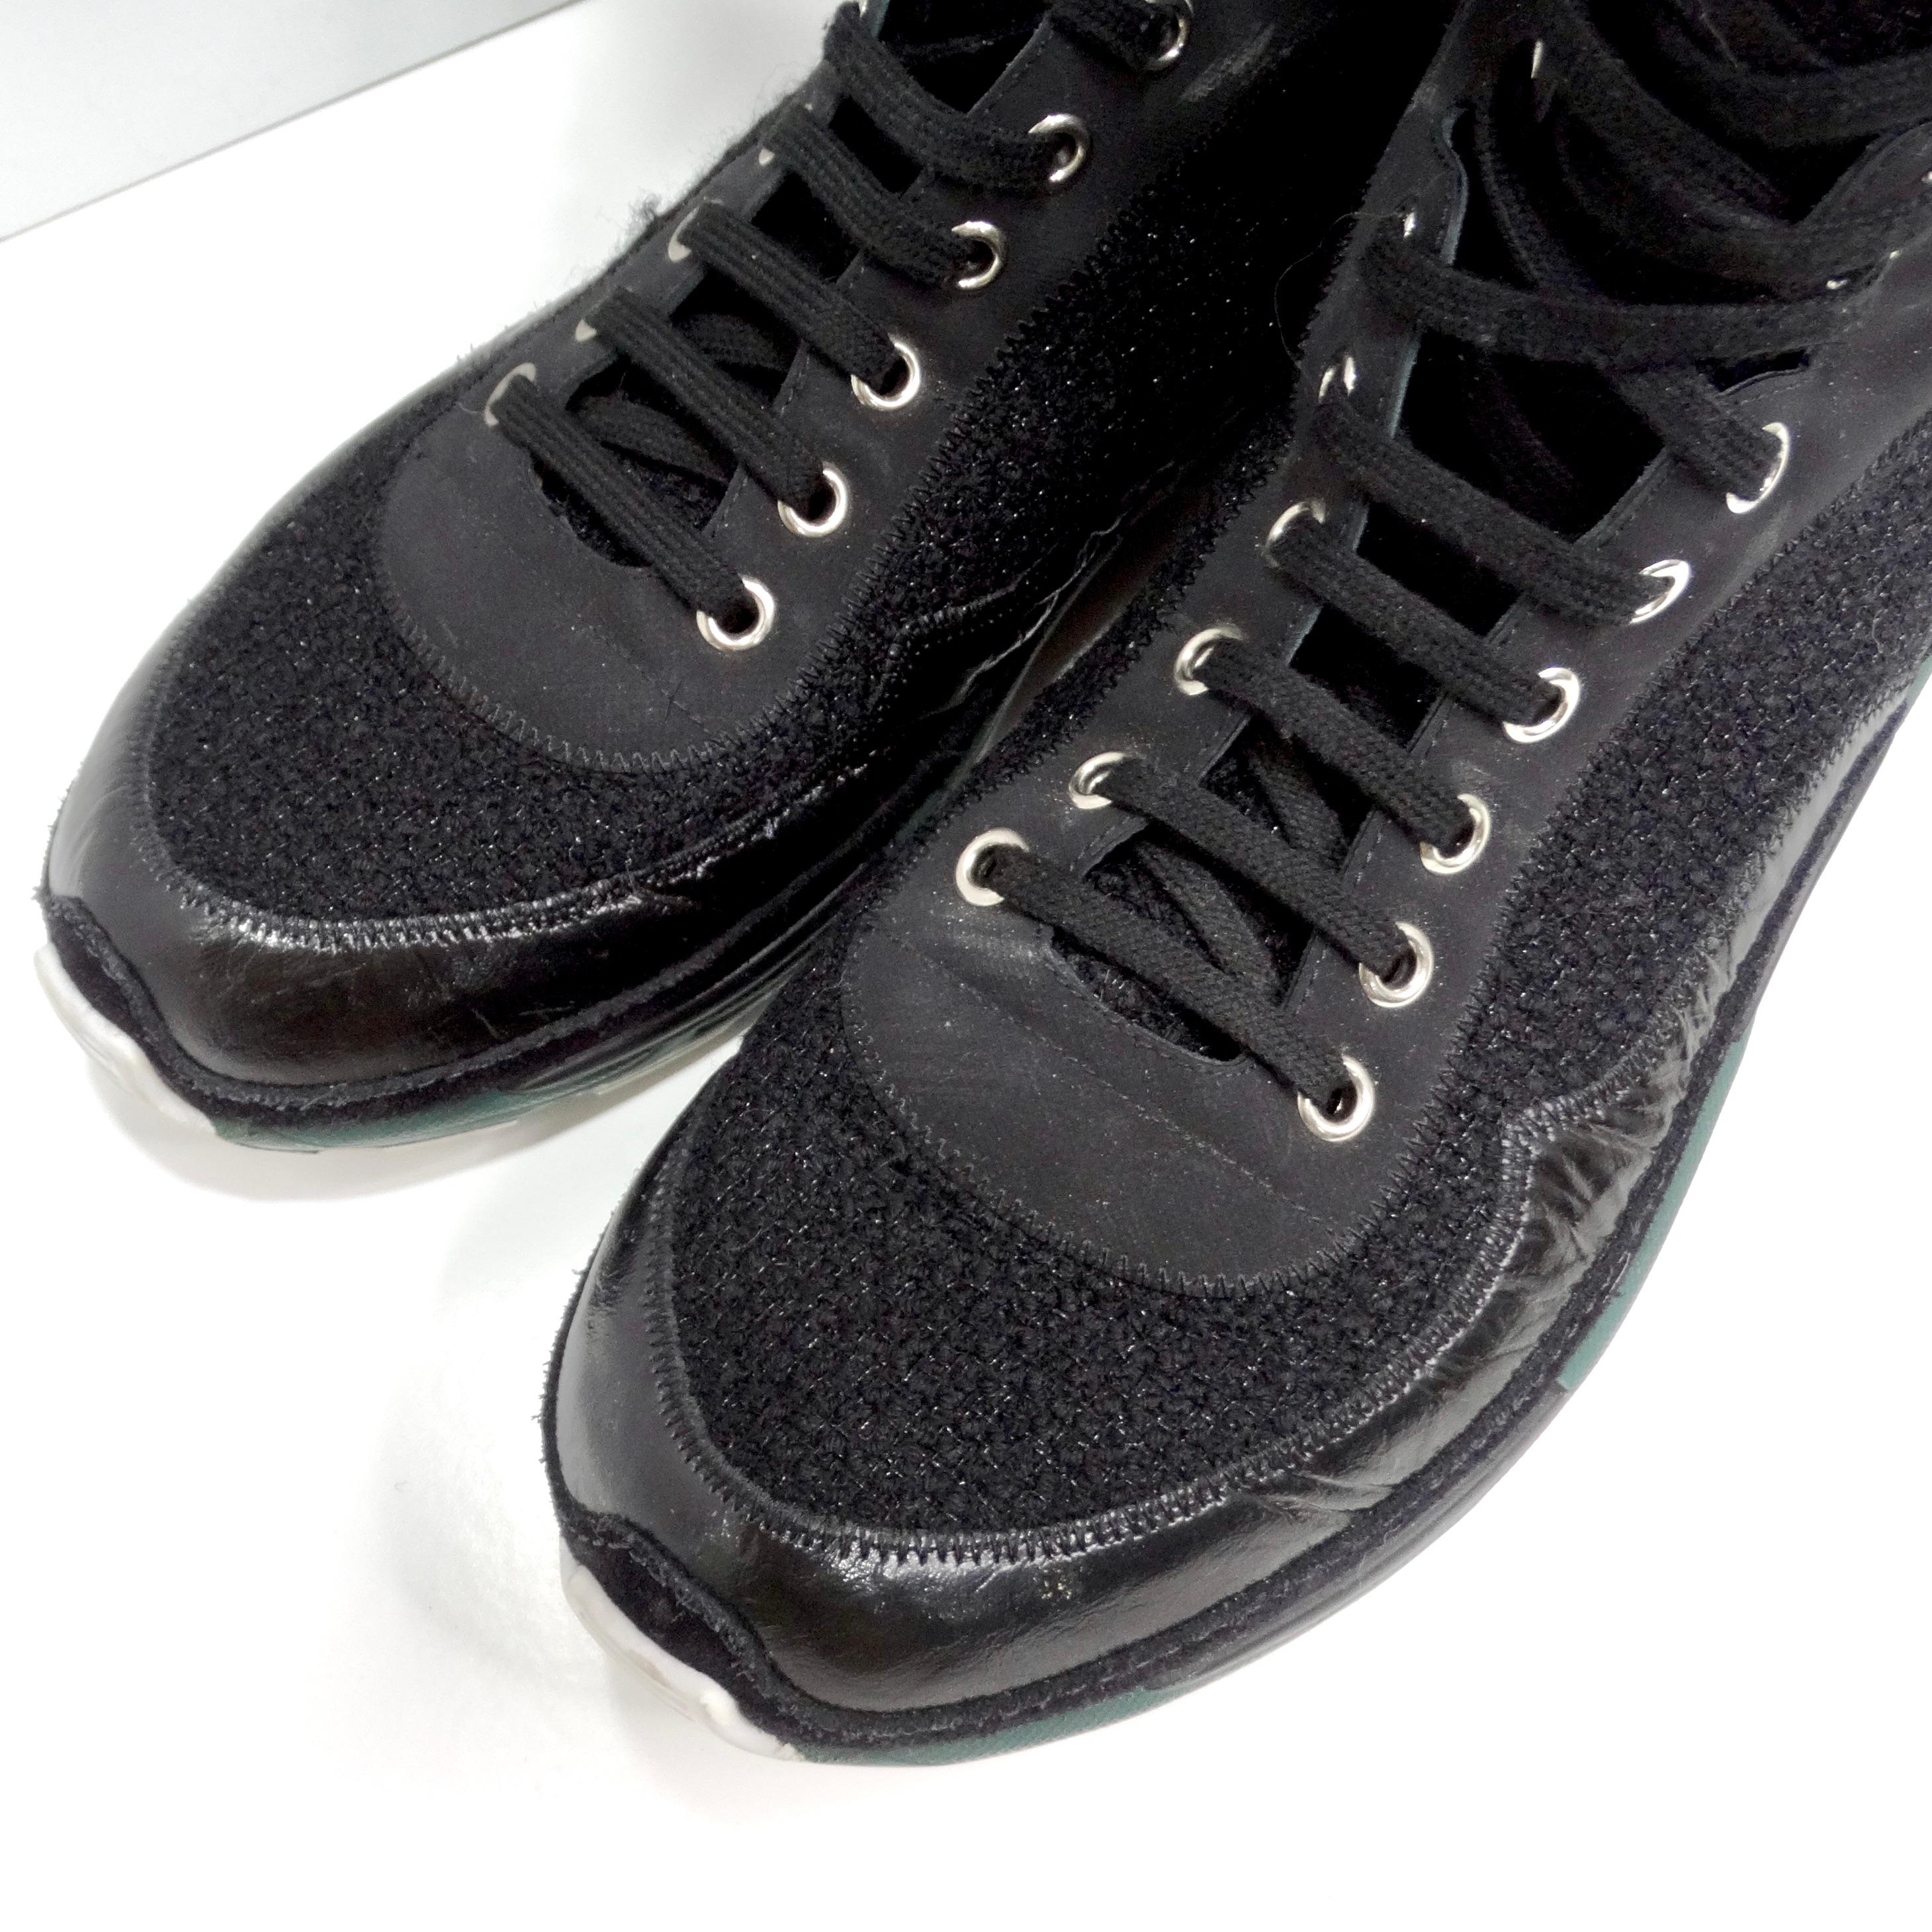 Chanel Fall 2014 Patent Calfskin Tweed Sneaker Boot For Sale 12